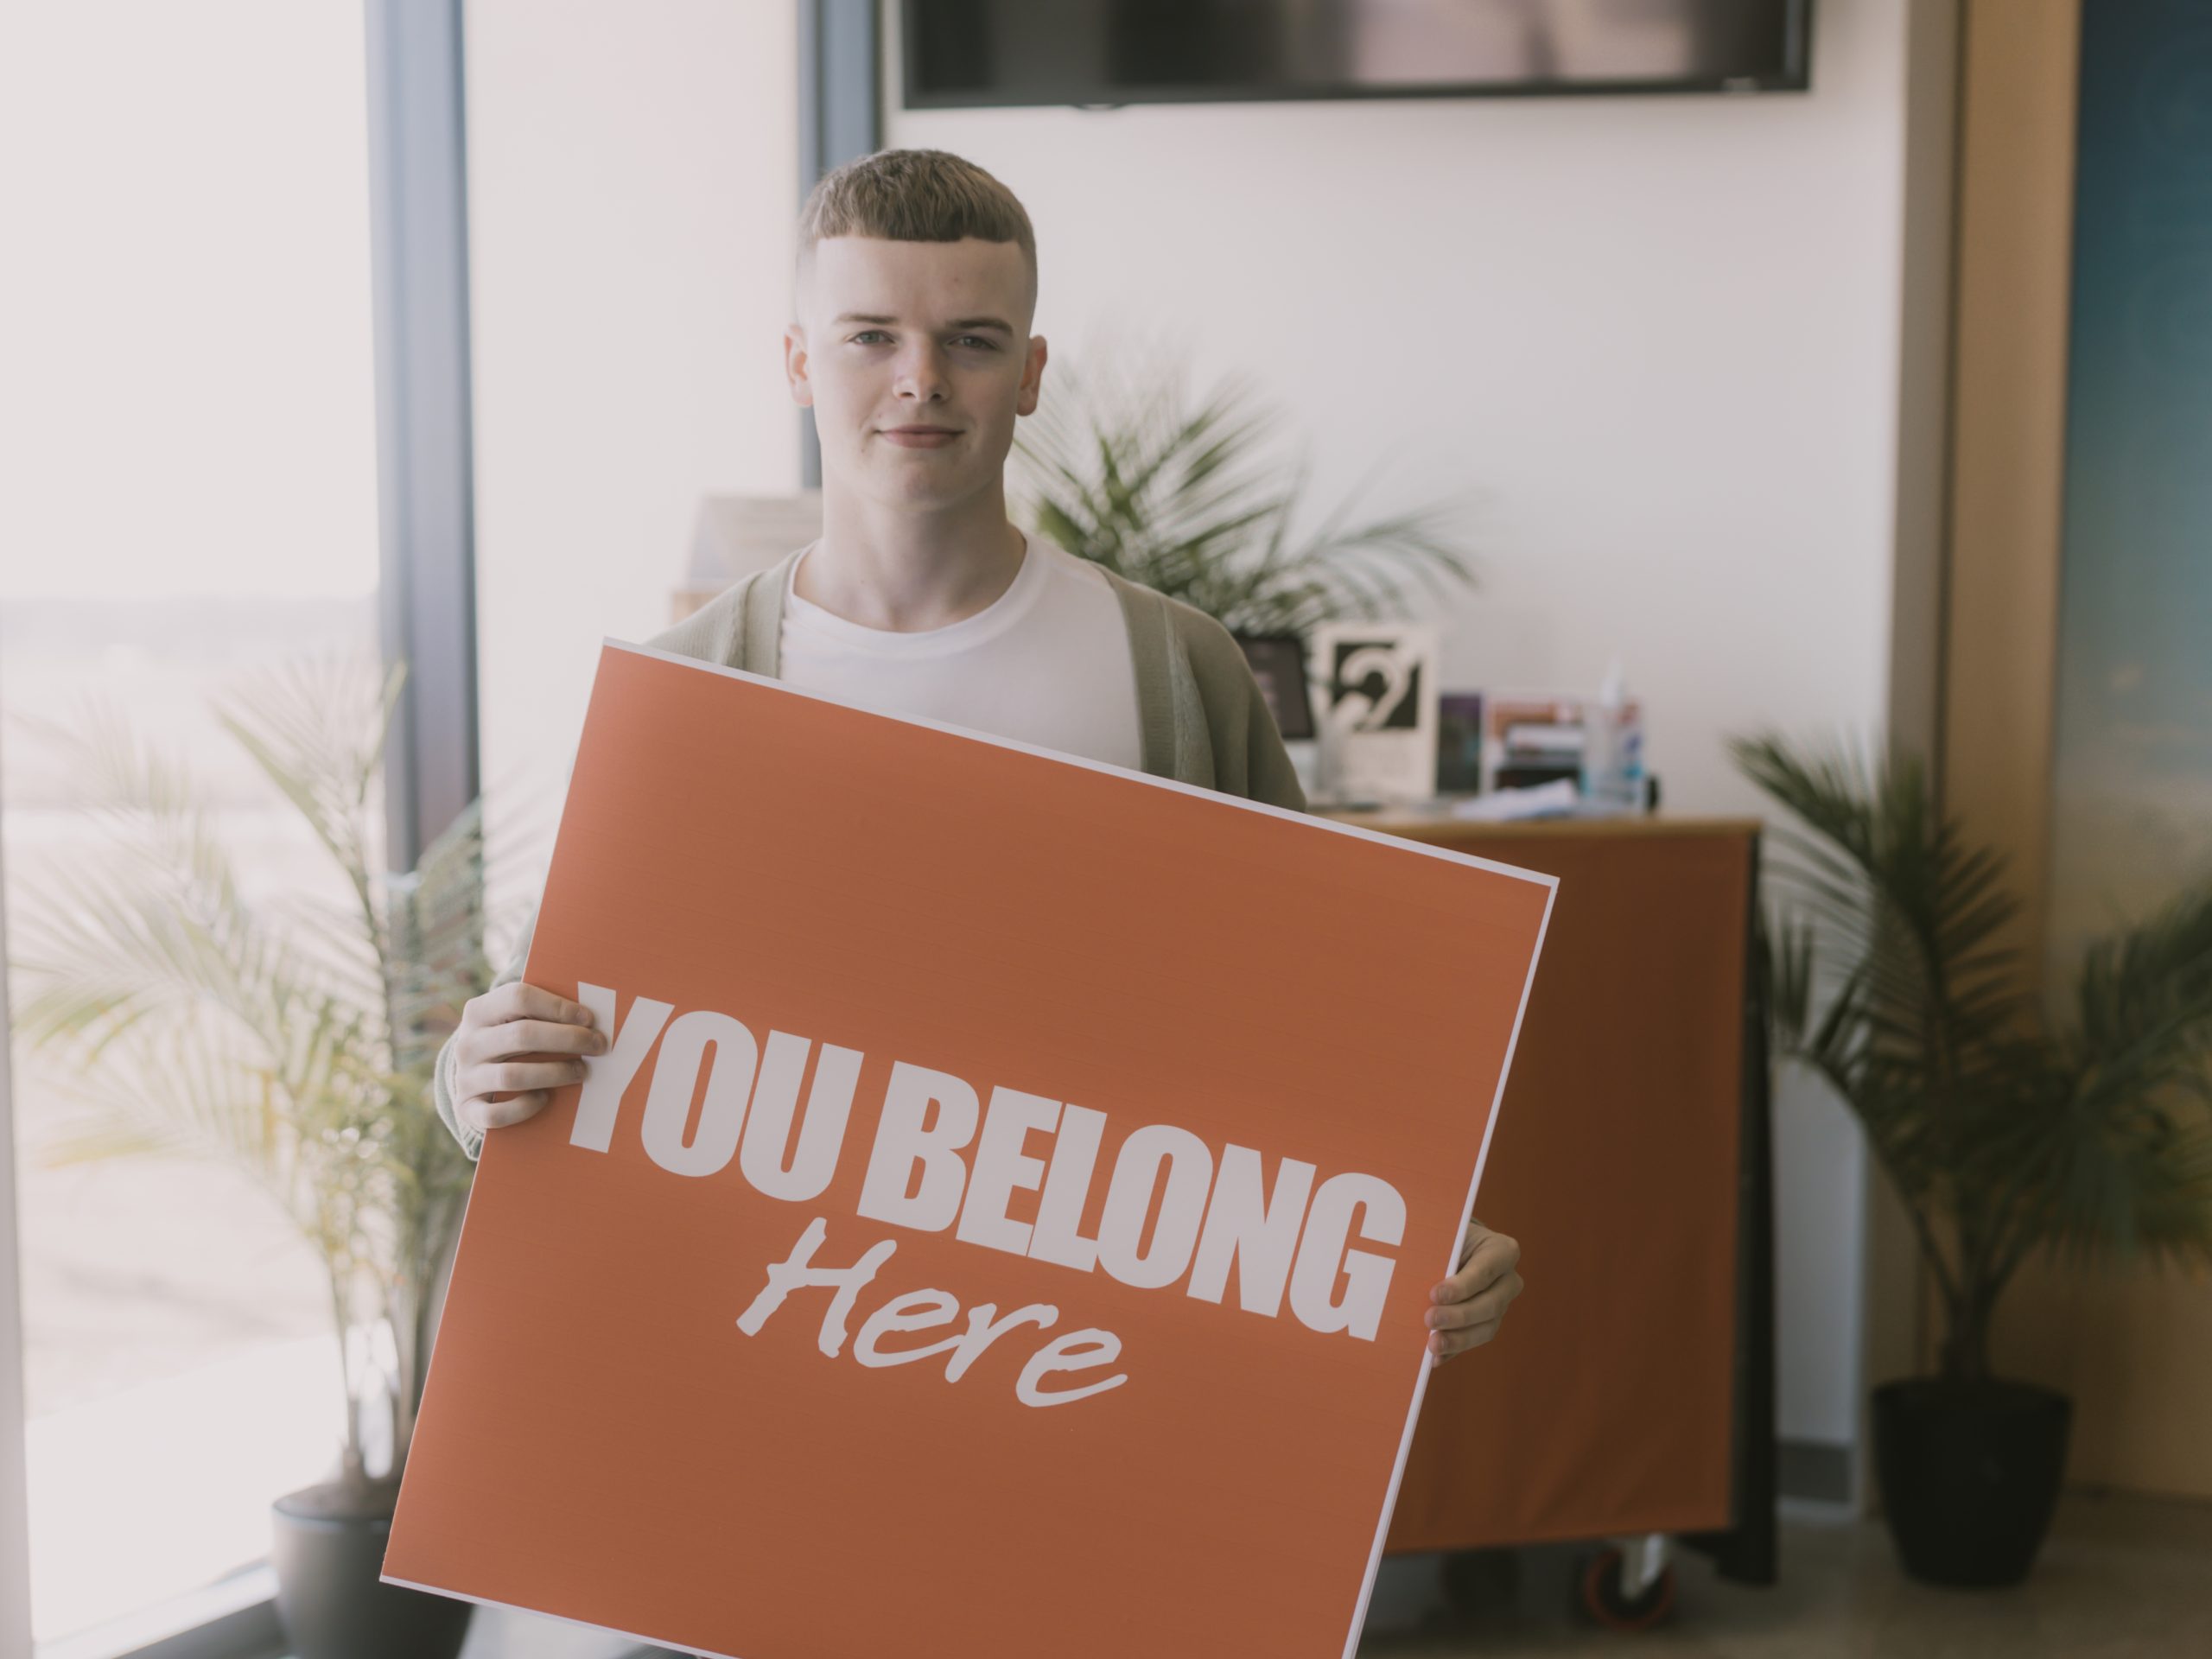 Leader holding an invitational orange sign in the Hope Grimes building that reads "You Belong Here"